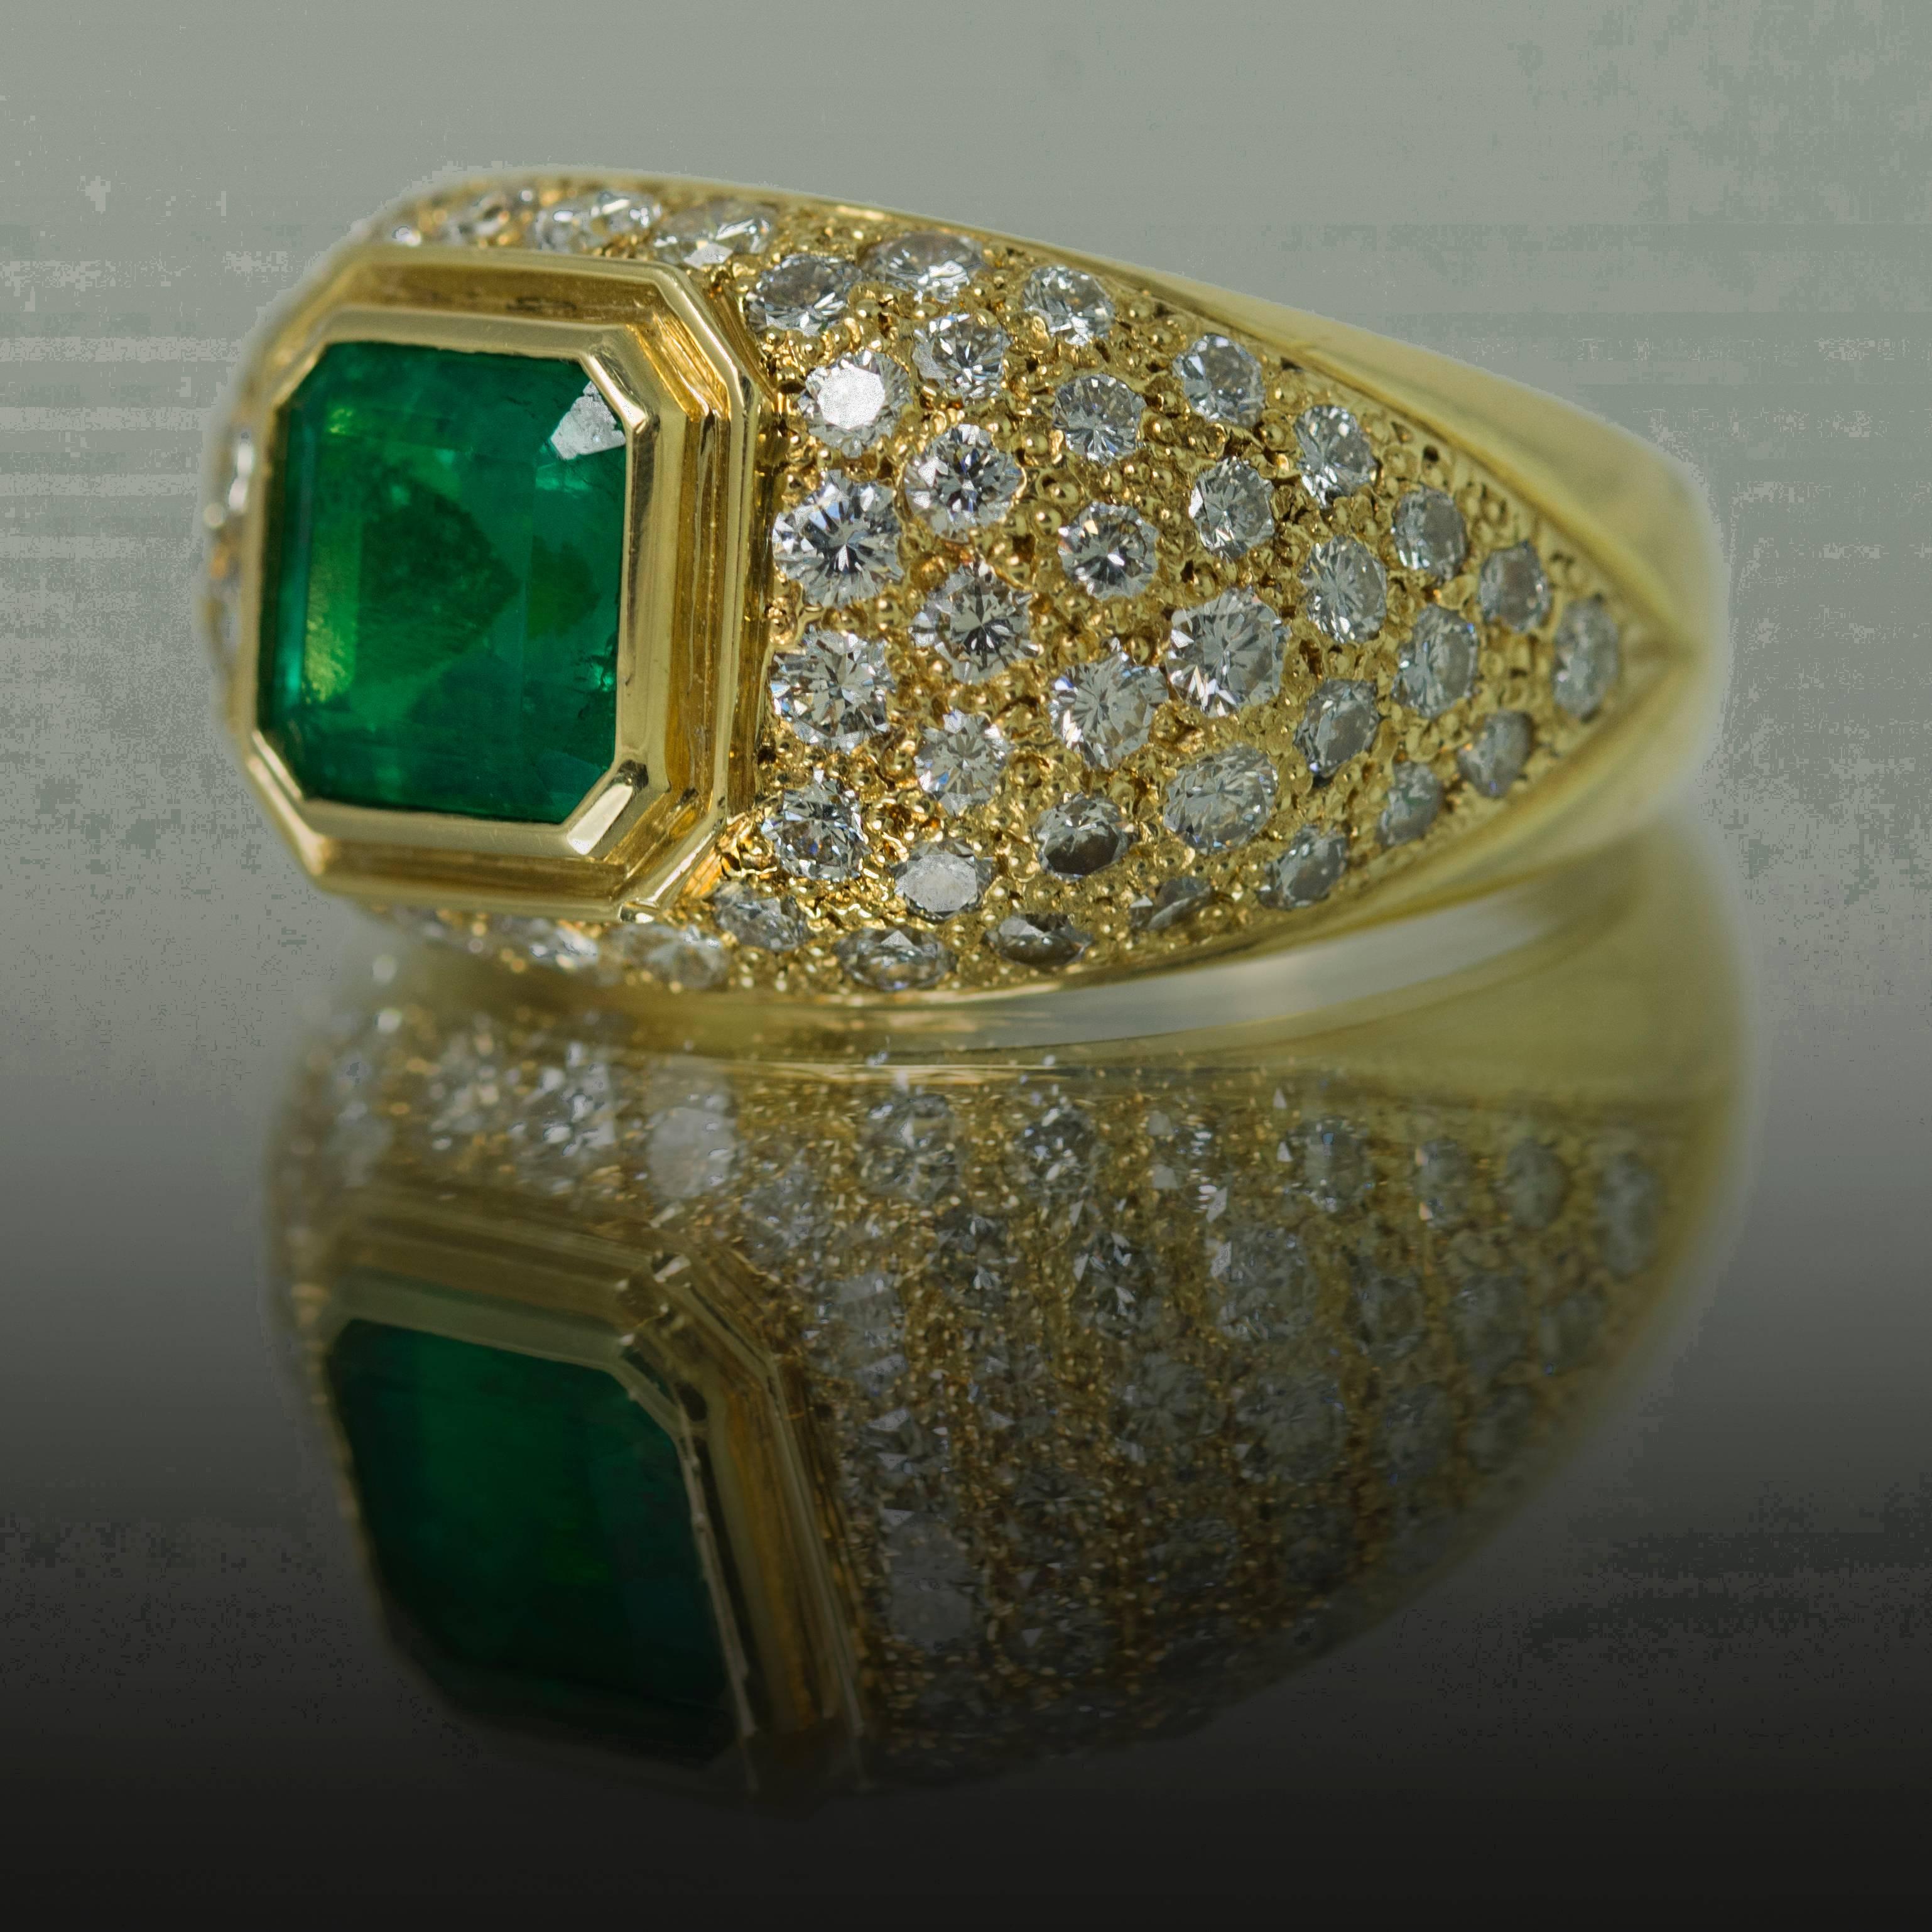 Beautiful 18k gold Ring with 1 Emerald Weighing 1.65 Carats and 74 Round Diamonds Weighing 2.76 Carats. We Offer Complementary Sizing with Each Purchase. 